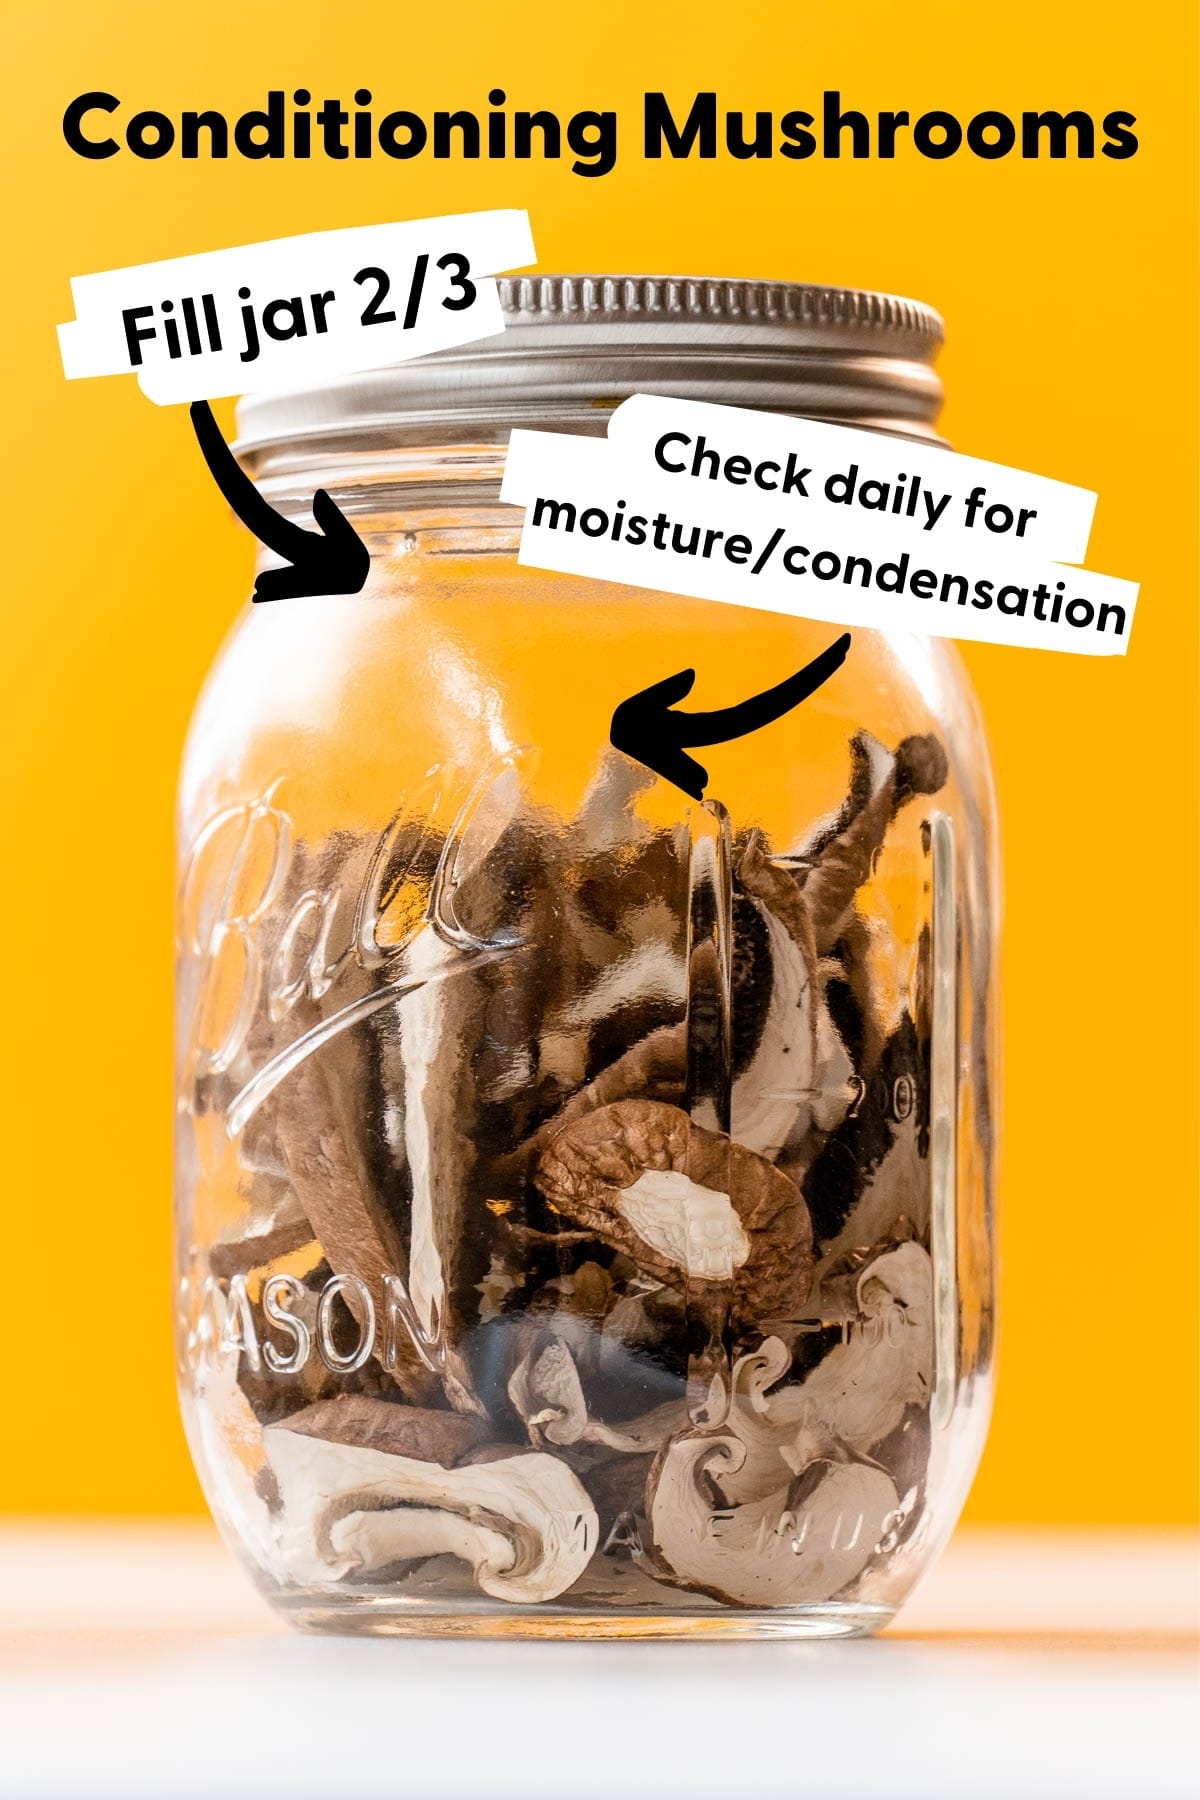 Dehydrated mushrooms in a jar. Text overlays read "Conditioning Mushrooms" "Fill jar 2/3" "Check daily for moisture/condensation"